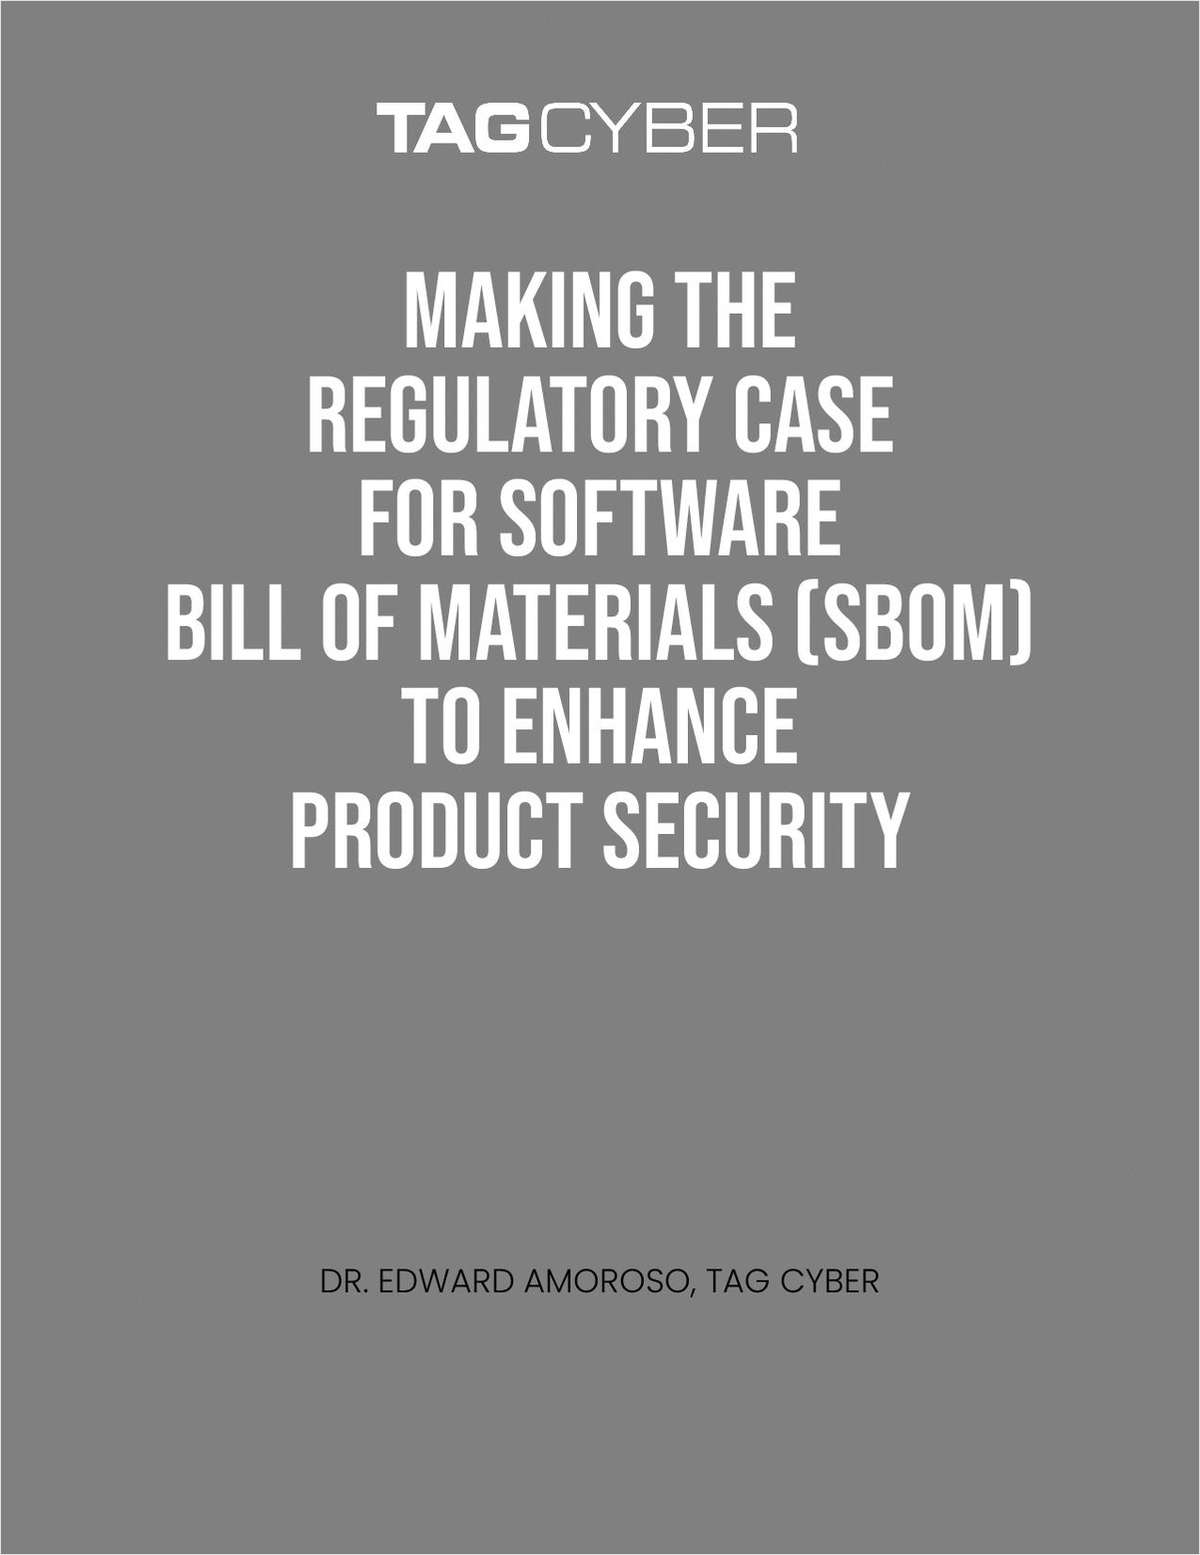 Making the Regulatory Case for Software Bill of Materials (SBOM) to Enhance Product Security